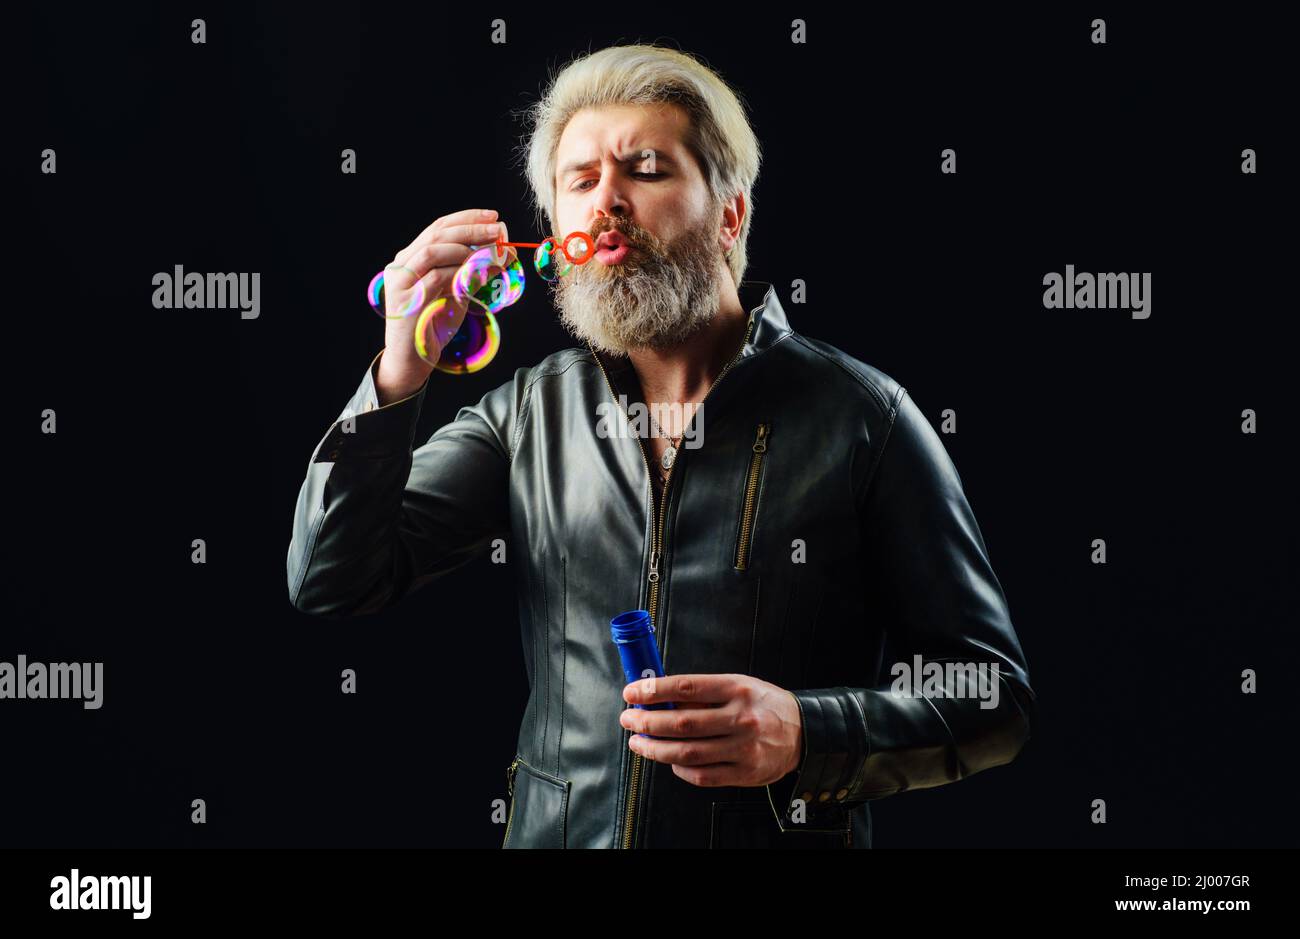 Handsome man blowing bubbles. Play with Soap bubble. Bearded guy in leather jacket. Good mood. Stock Photo